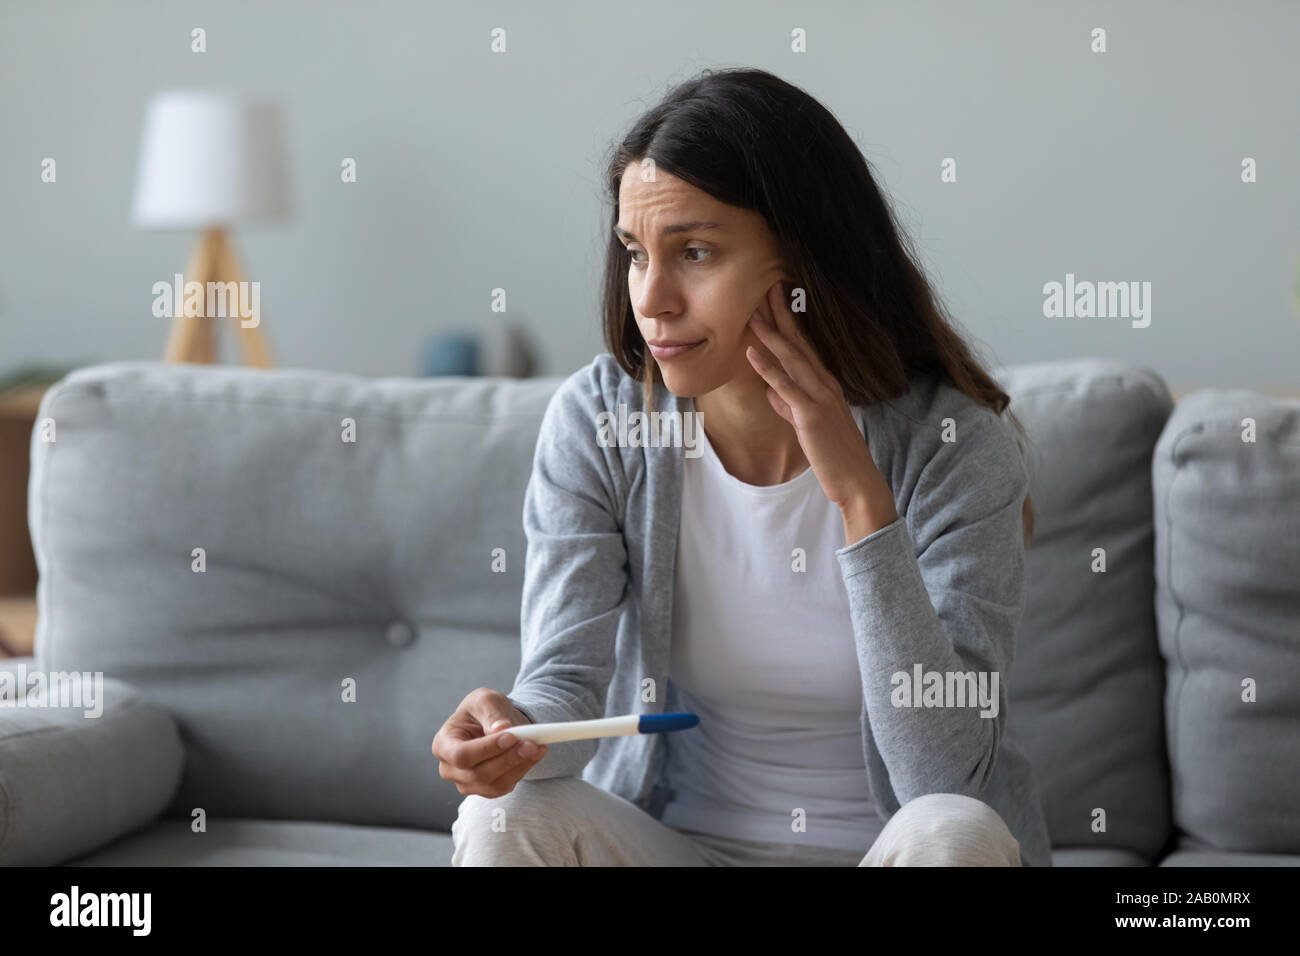 Woman feels frustrated about positive test and unplanned pregnancy Stock Photo